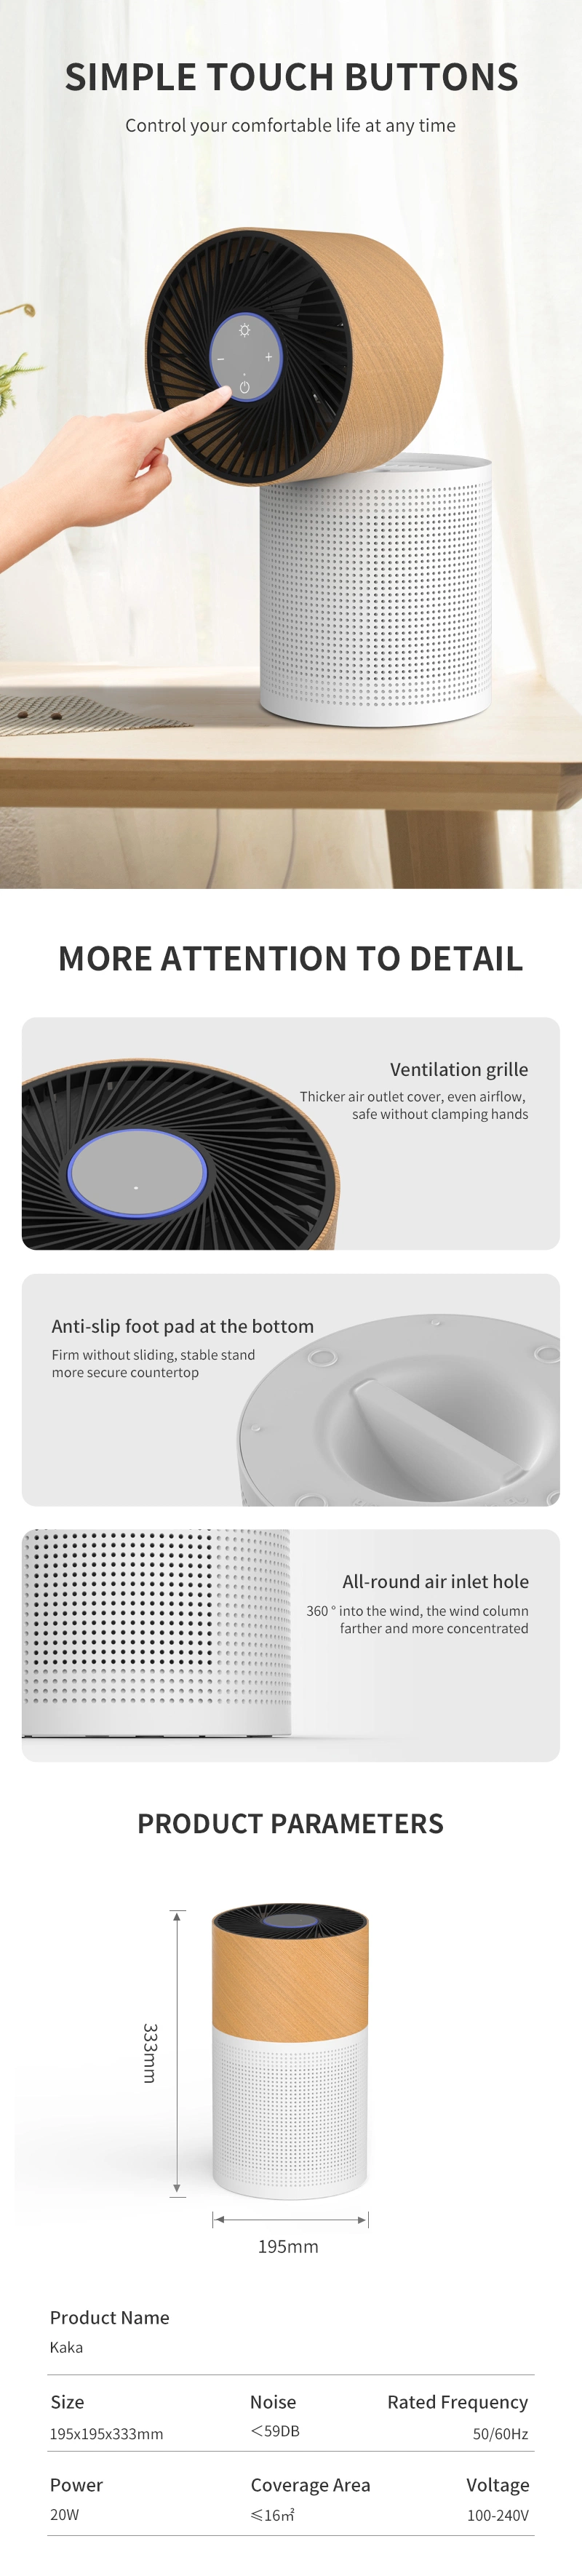 UVC Lights HEPA Filter Cleaner Intelligent Best Seller Amazon with Great Price Air Purifier